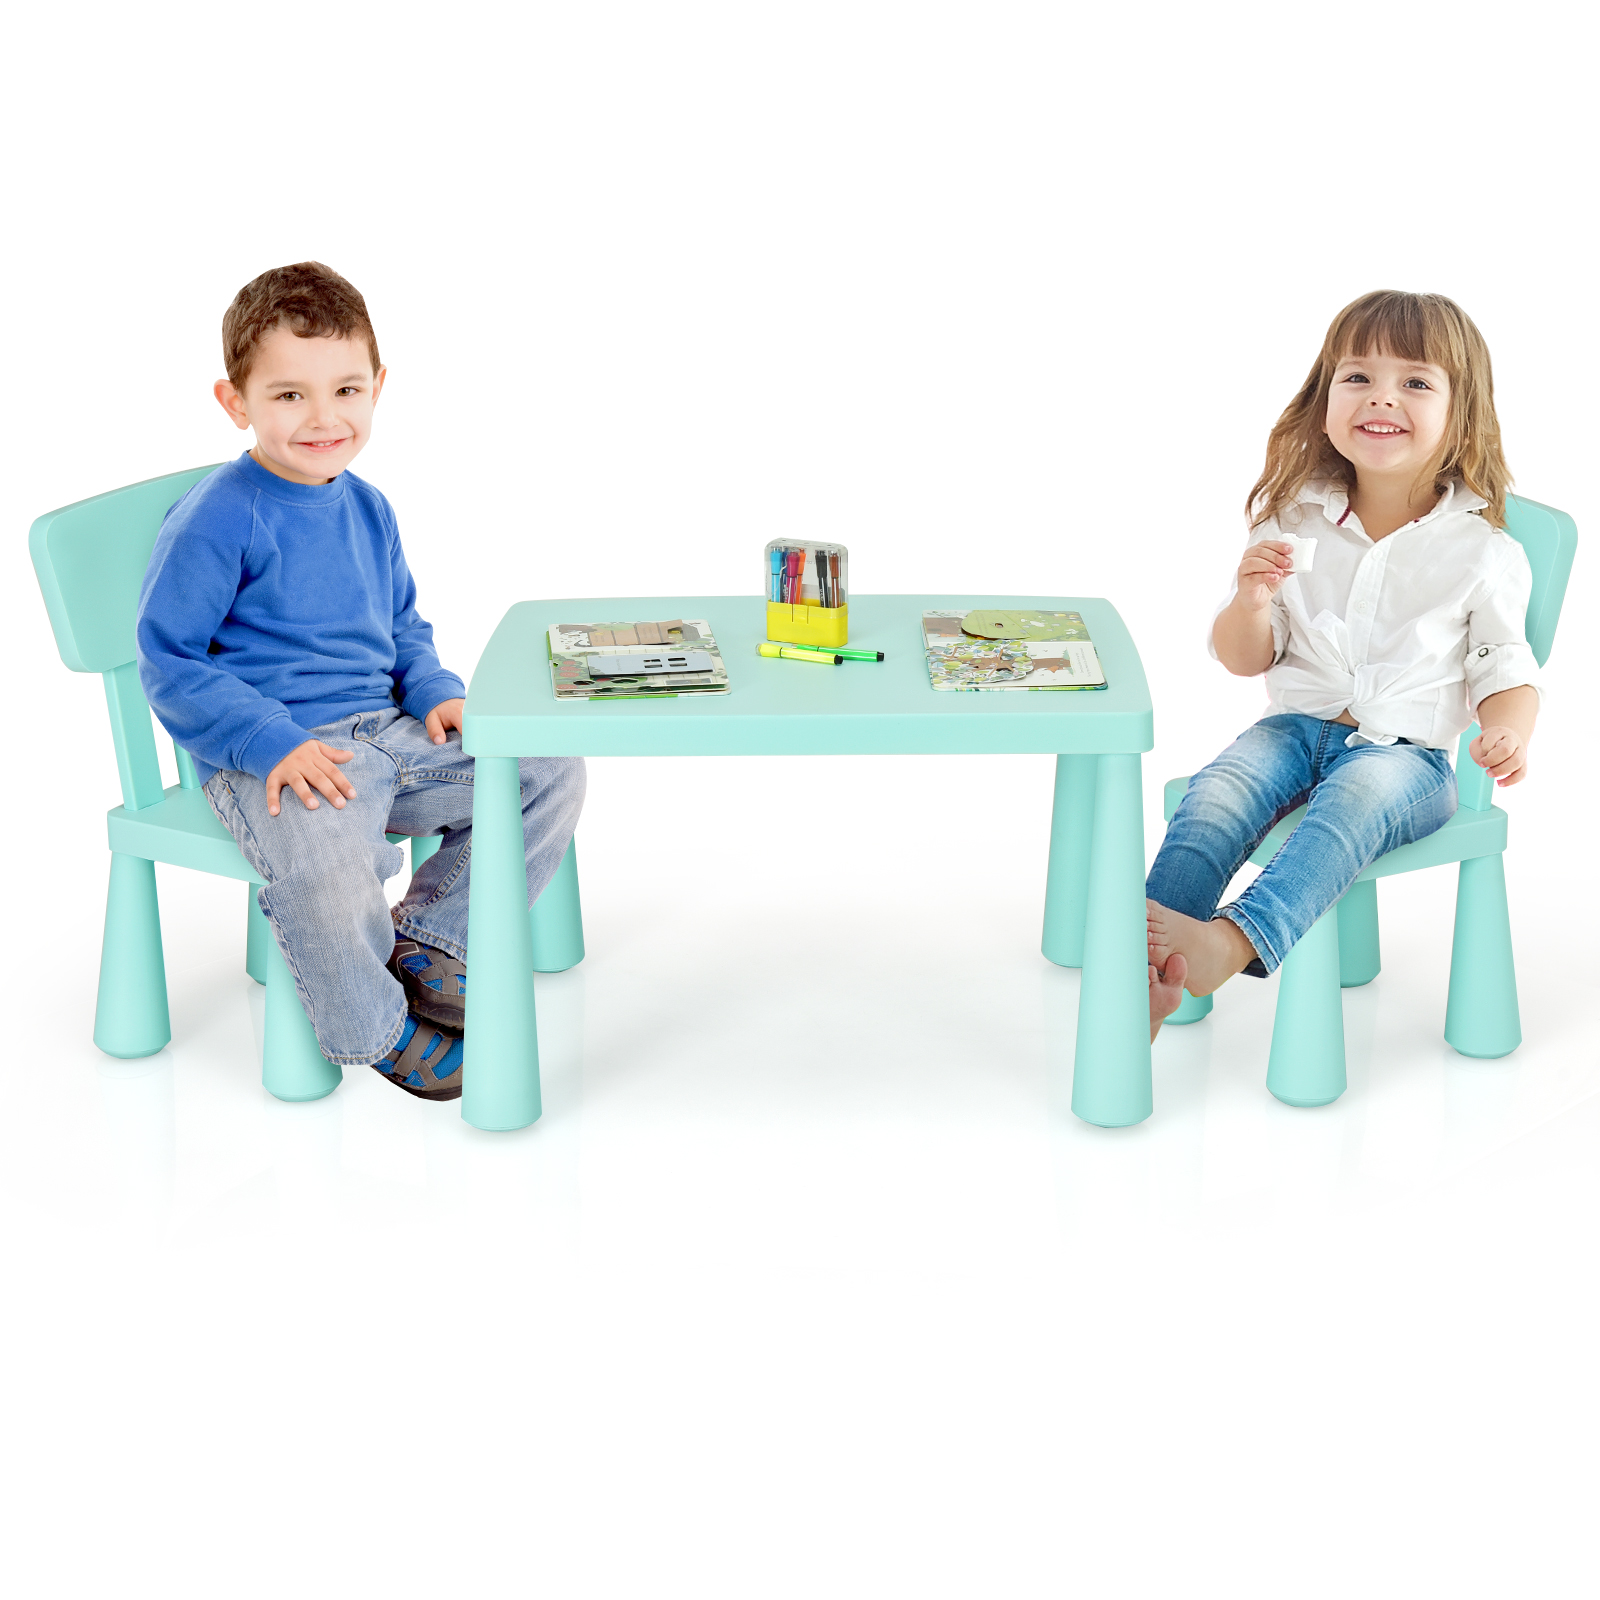 Topbuy Kids Furniture Set with Table & 2 Chairs Children Playing Table Ideal Gift for Kids Green